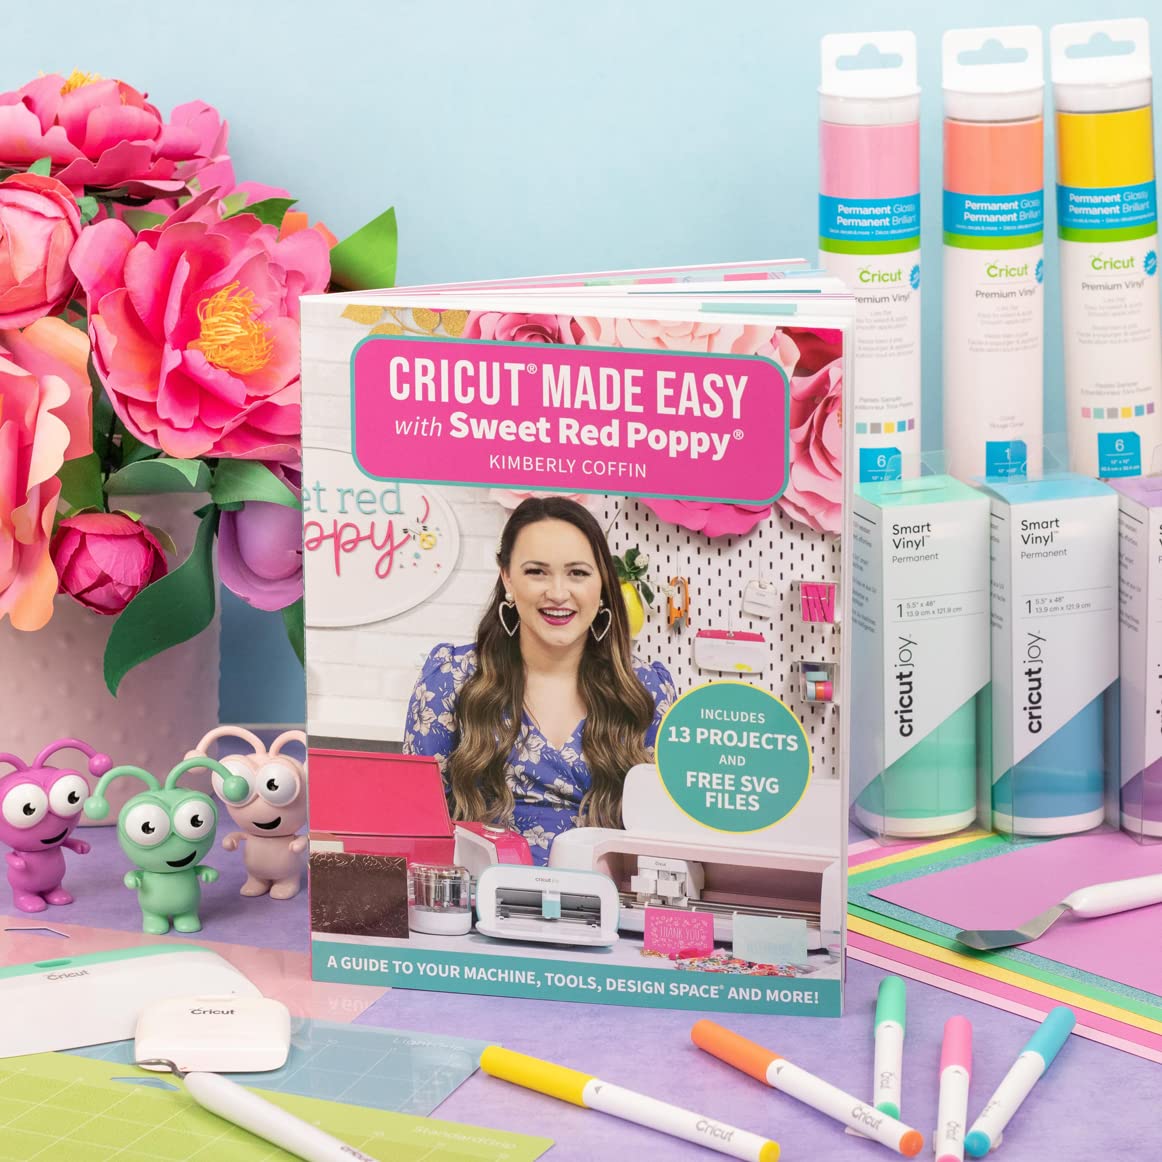 Cricut Made Easy with Sweet Red Poppy: A Guide to Your Machine, Tools, Design Space and More! - Includes 13 Projects & Free SVG Files